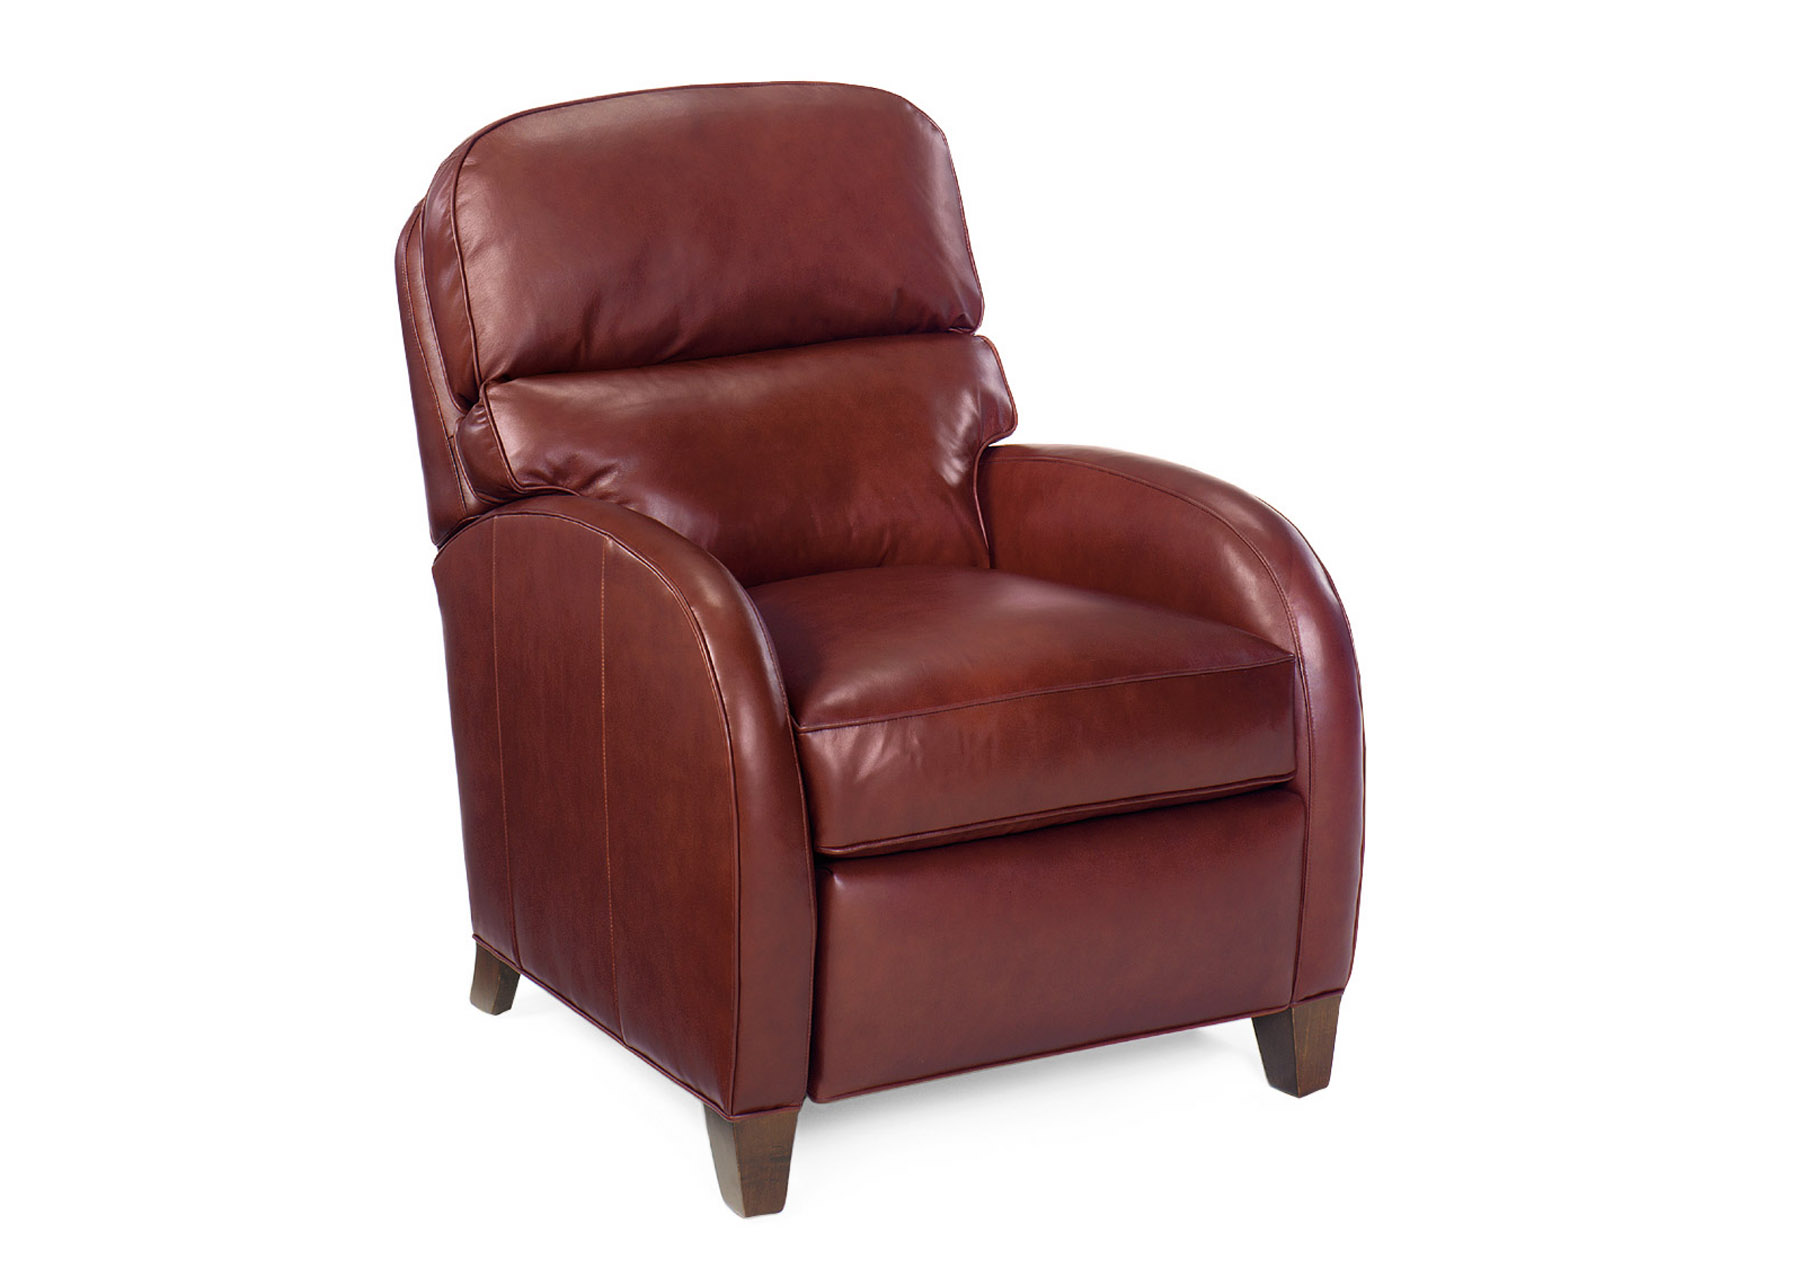 JUSTICE POWER RECLINER W/ BATTERY